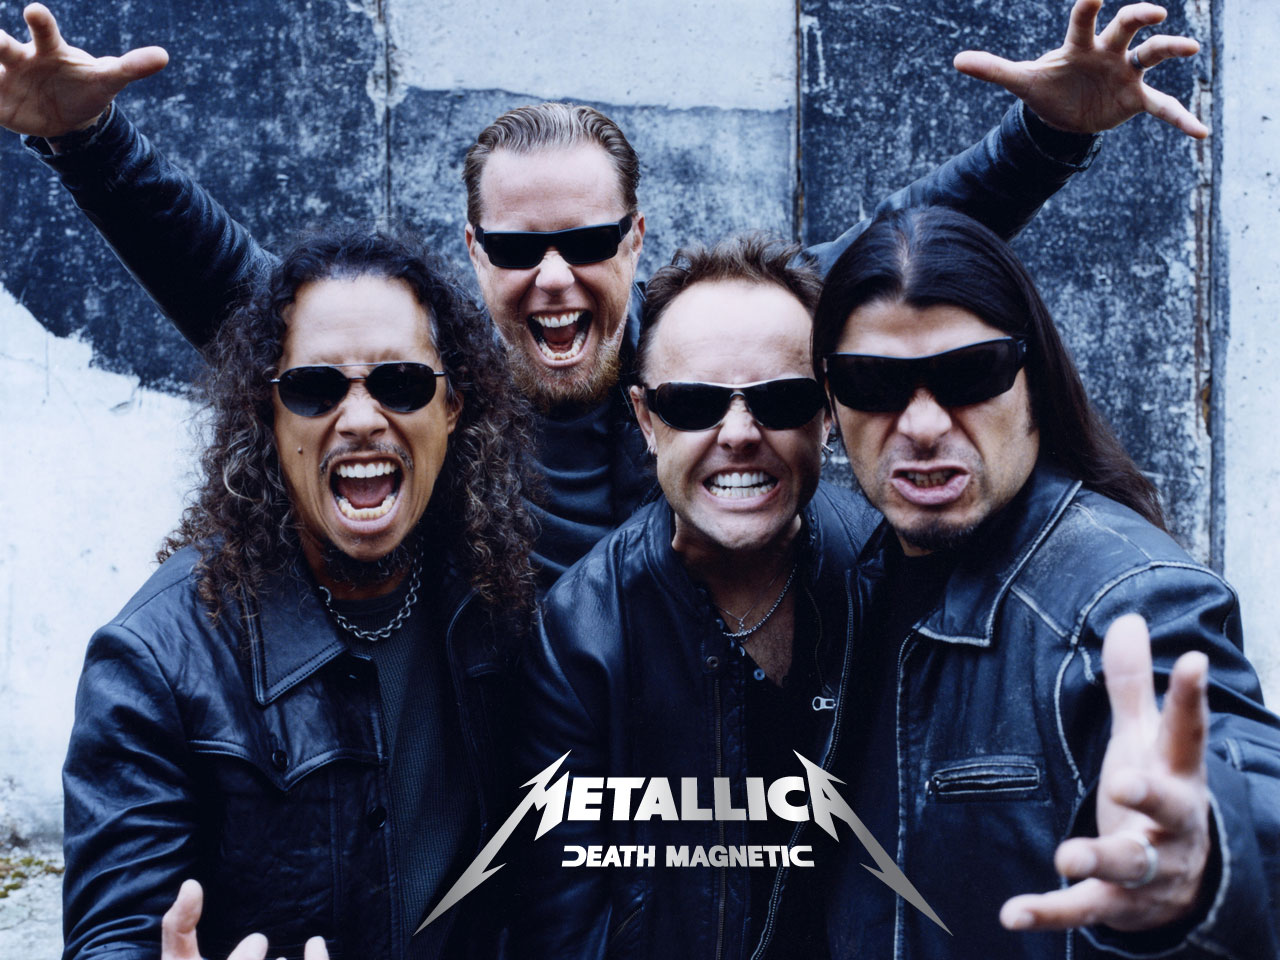 name of the band Metallica is the plagiarism